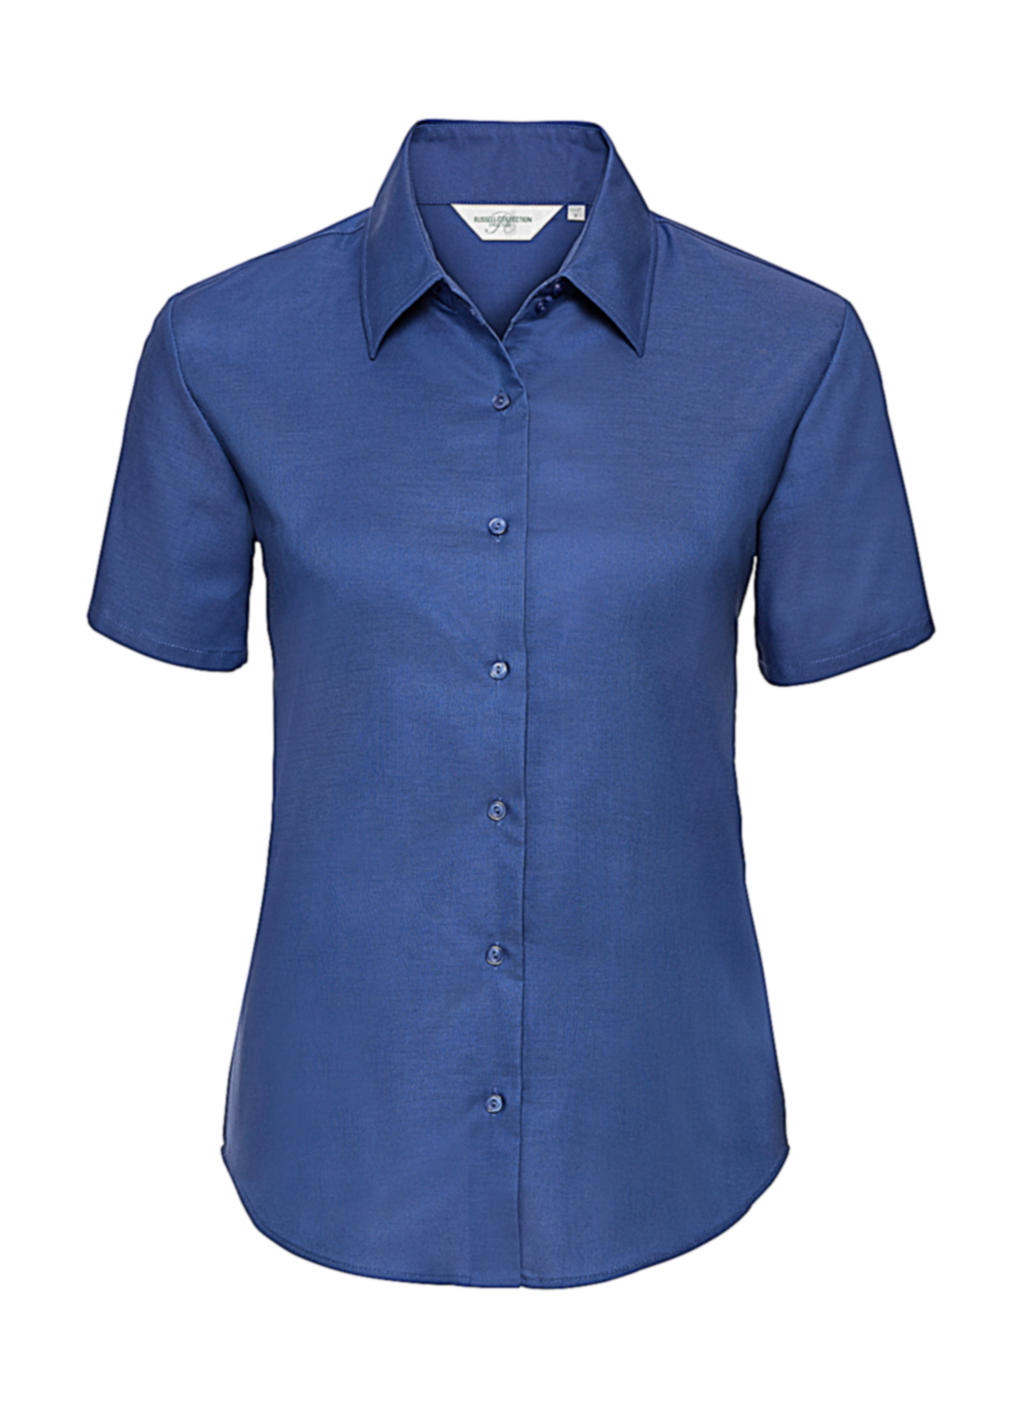  Ladies Classic Oxford Shirt in Farbe Aztec Blue